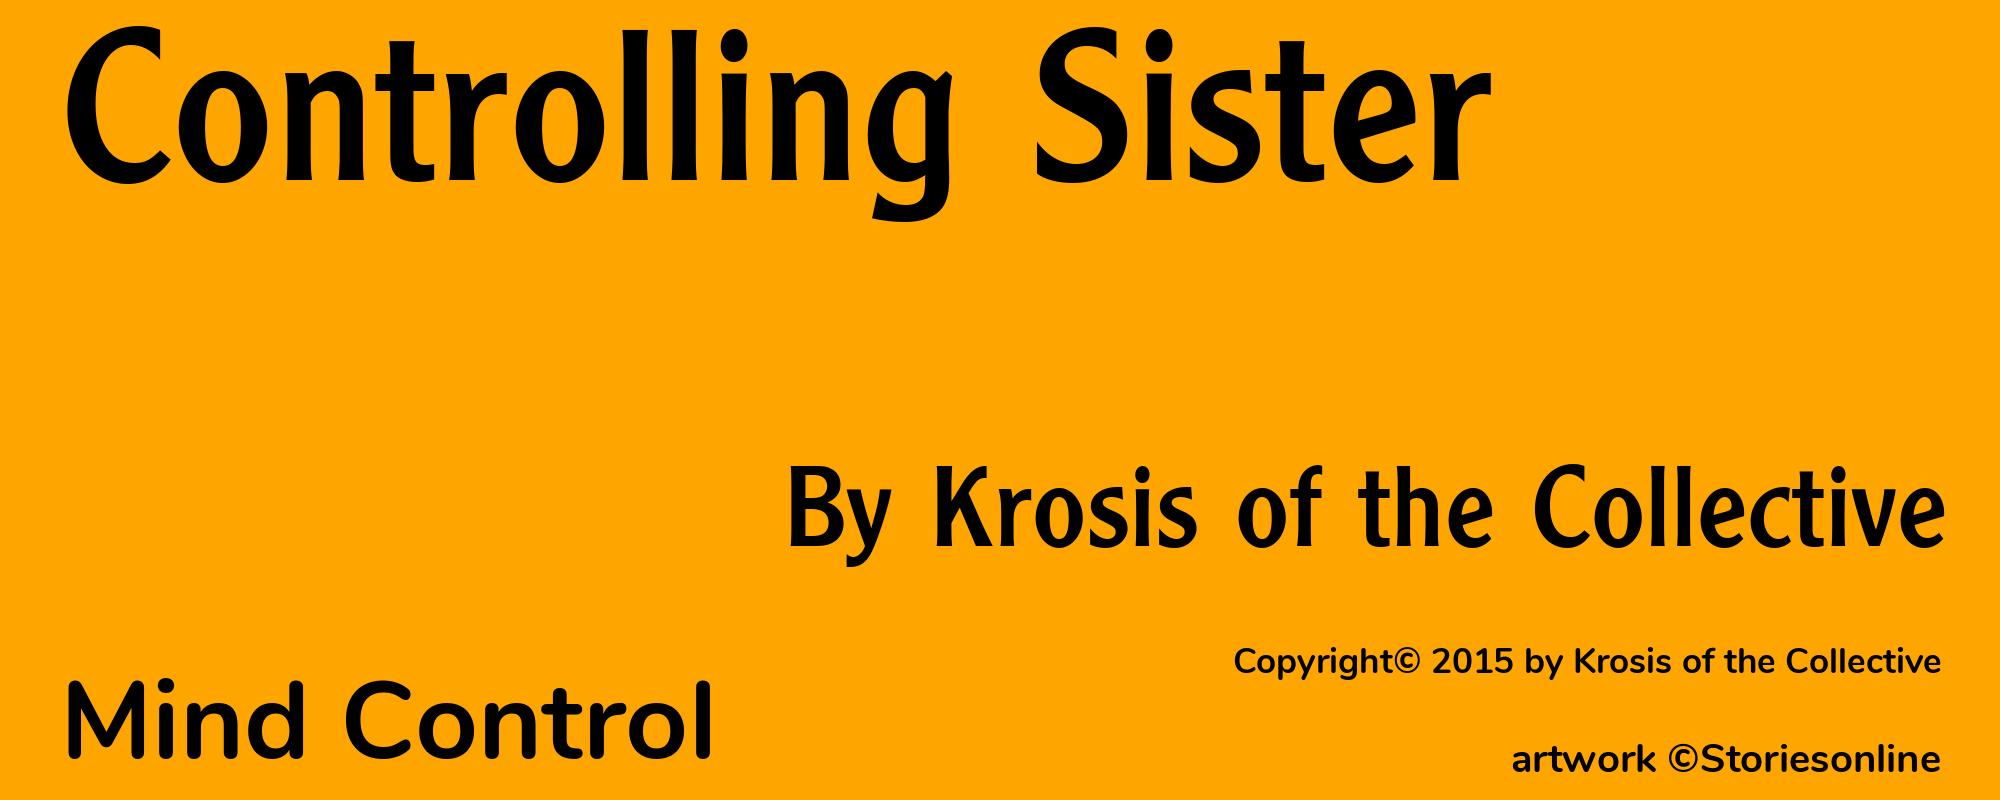 Controlling Sister - Cover